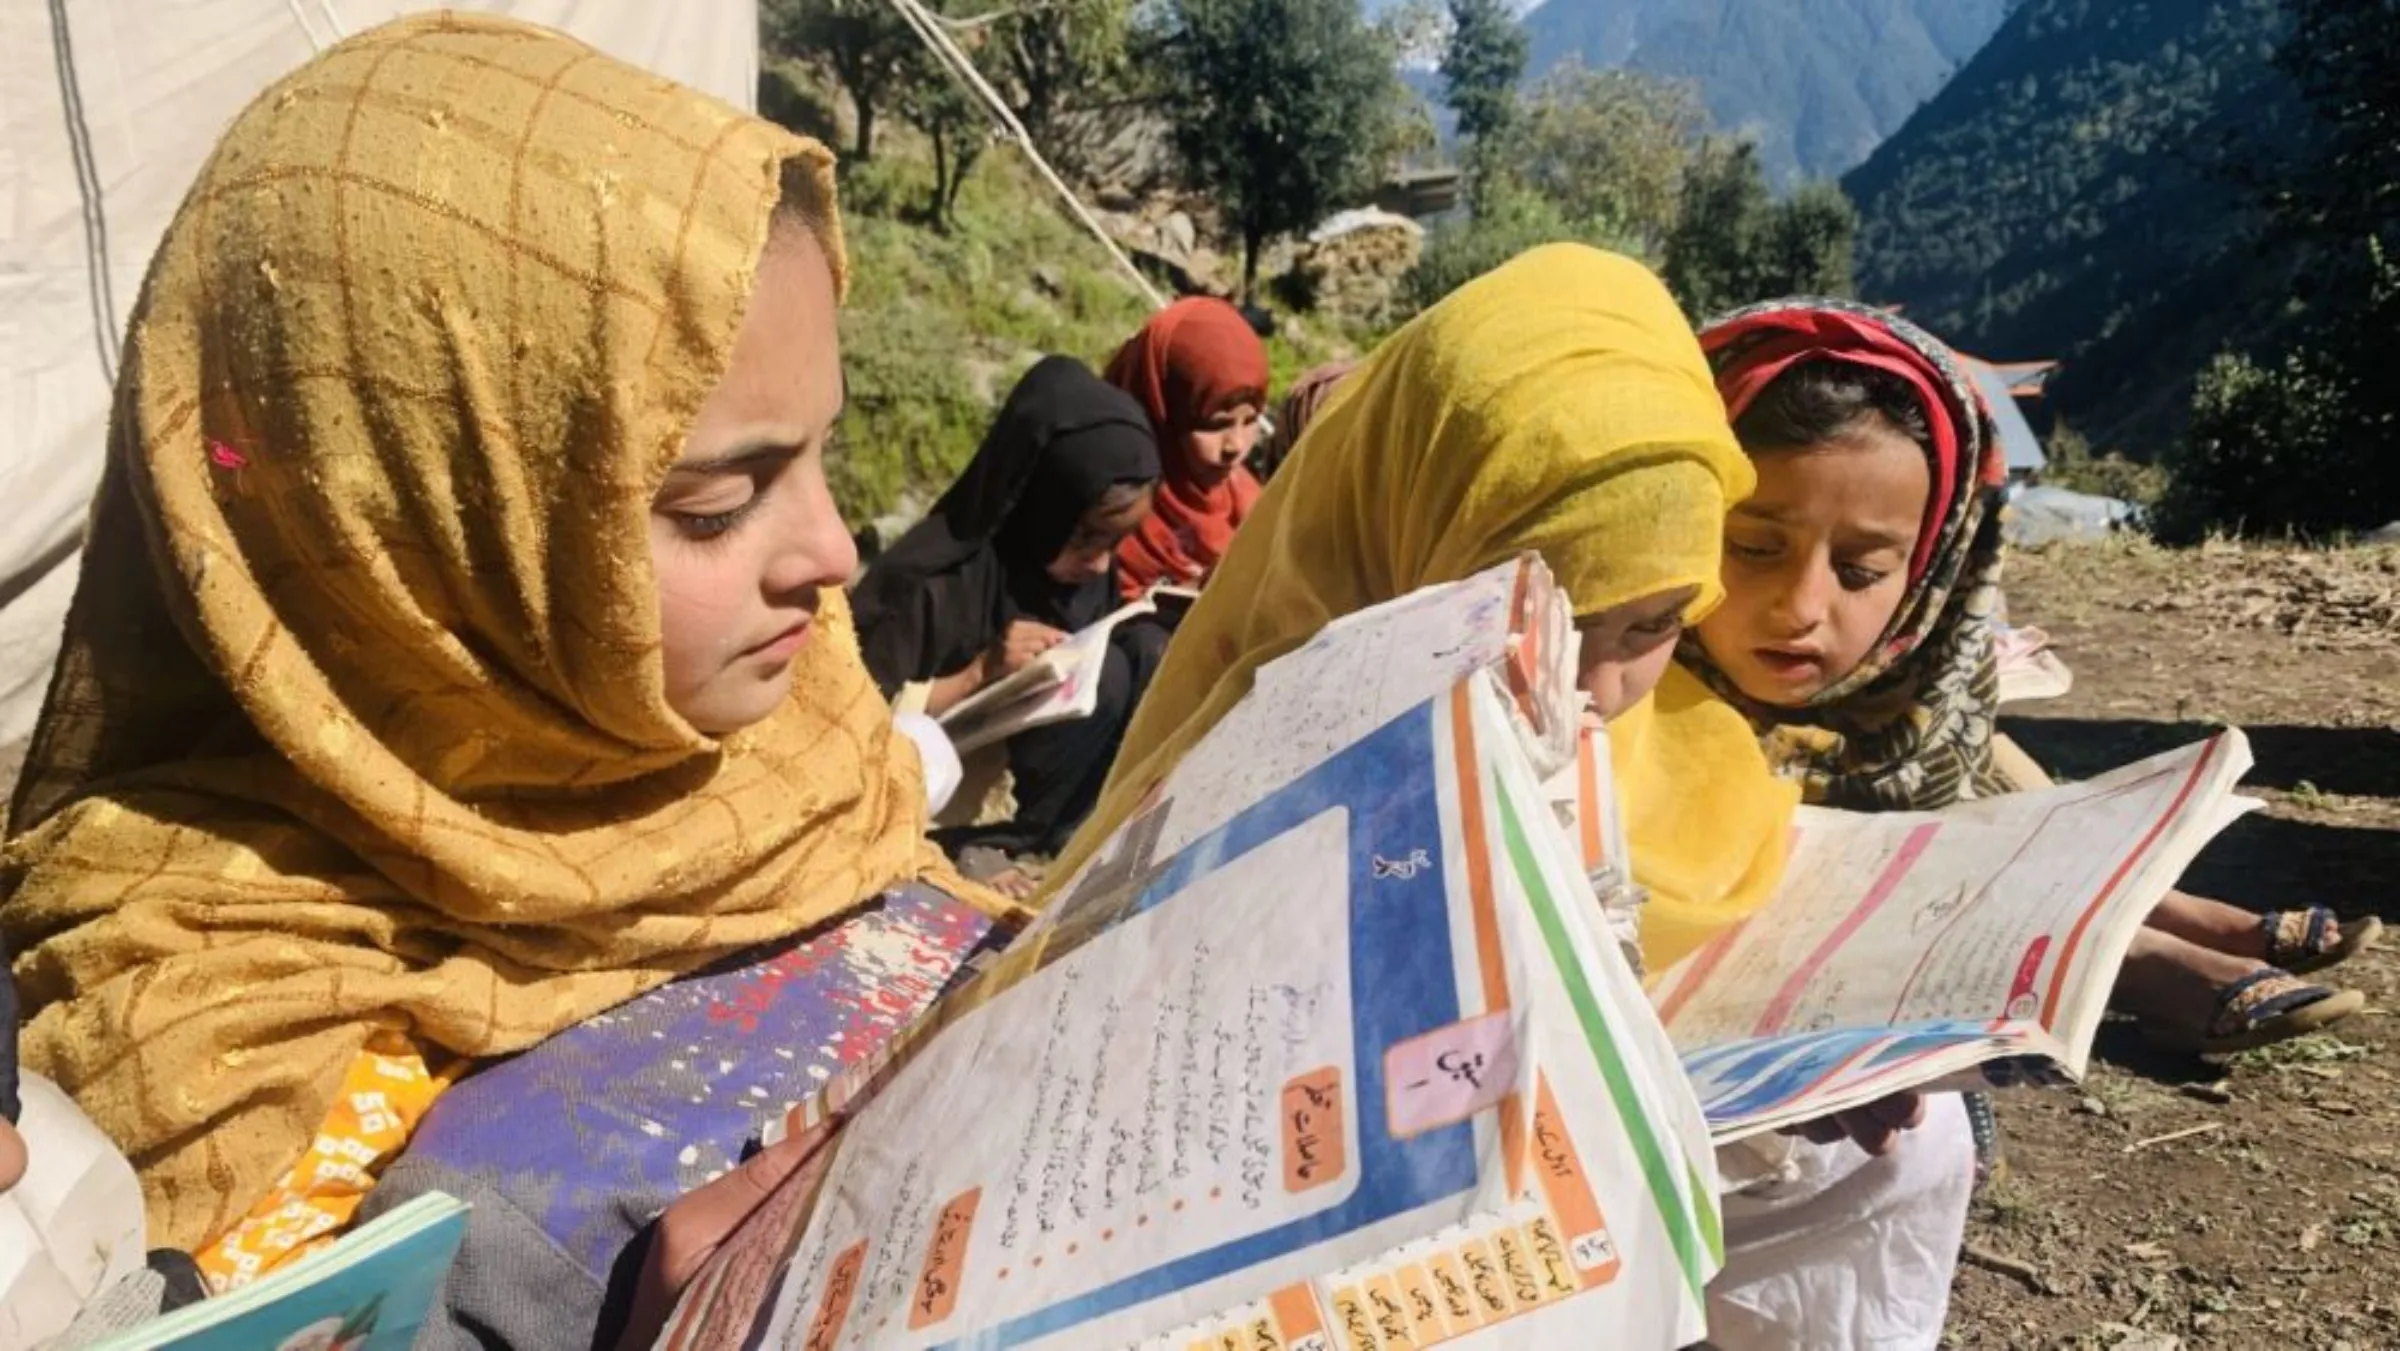 Sinain Bibi reads at a makeshift school in a village in Swat district in Pakistan’s northwest Khyber Pakhtunkhwa province, October 24, 2022